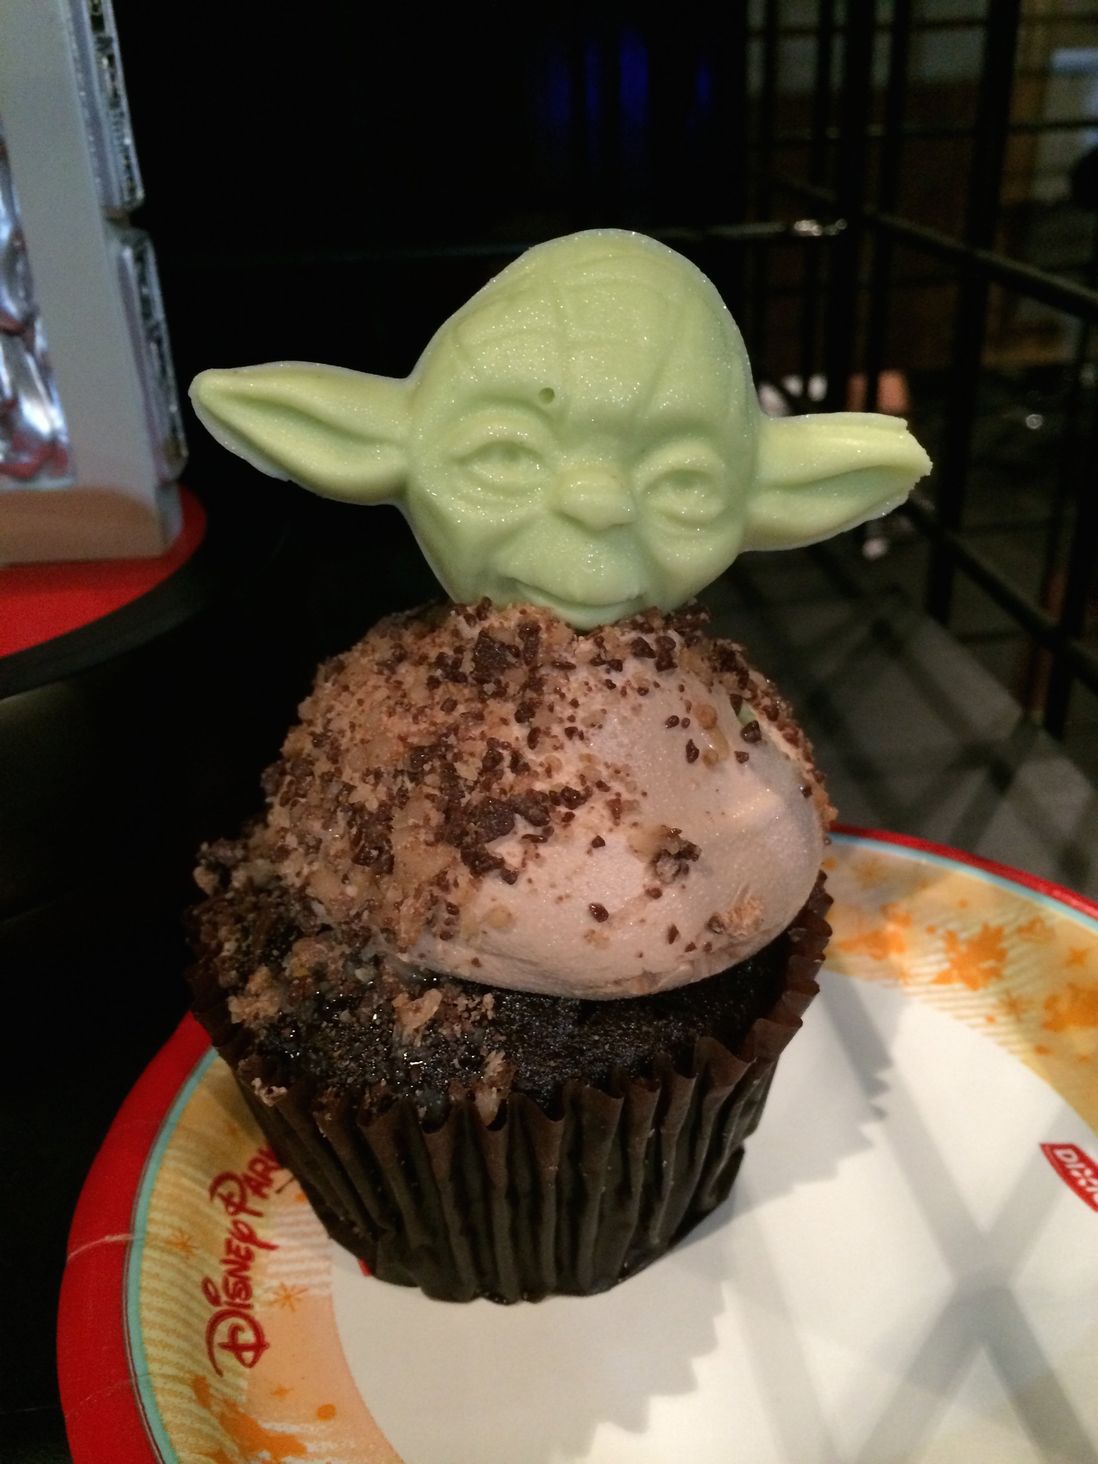 Disney World always pulls out all the stops for new films and special events. For Star Wars Weekend, Disneyworld did special Star Wars-themed alcoholic drinks and cupcakes for the occasion. Can you say no to a Chocolate and Nutella Cupcake topped with a White Chocolate Yoda or a 'The Force' or 'The Dark Side' cocktail with a glow cube. <br/>